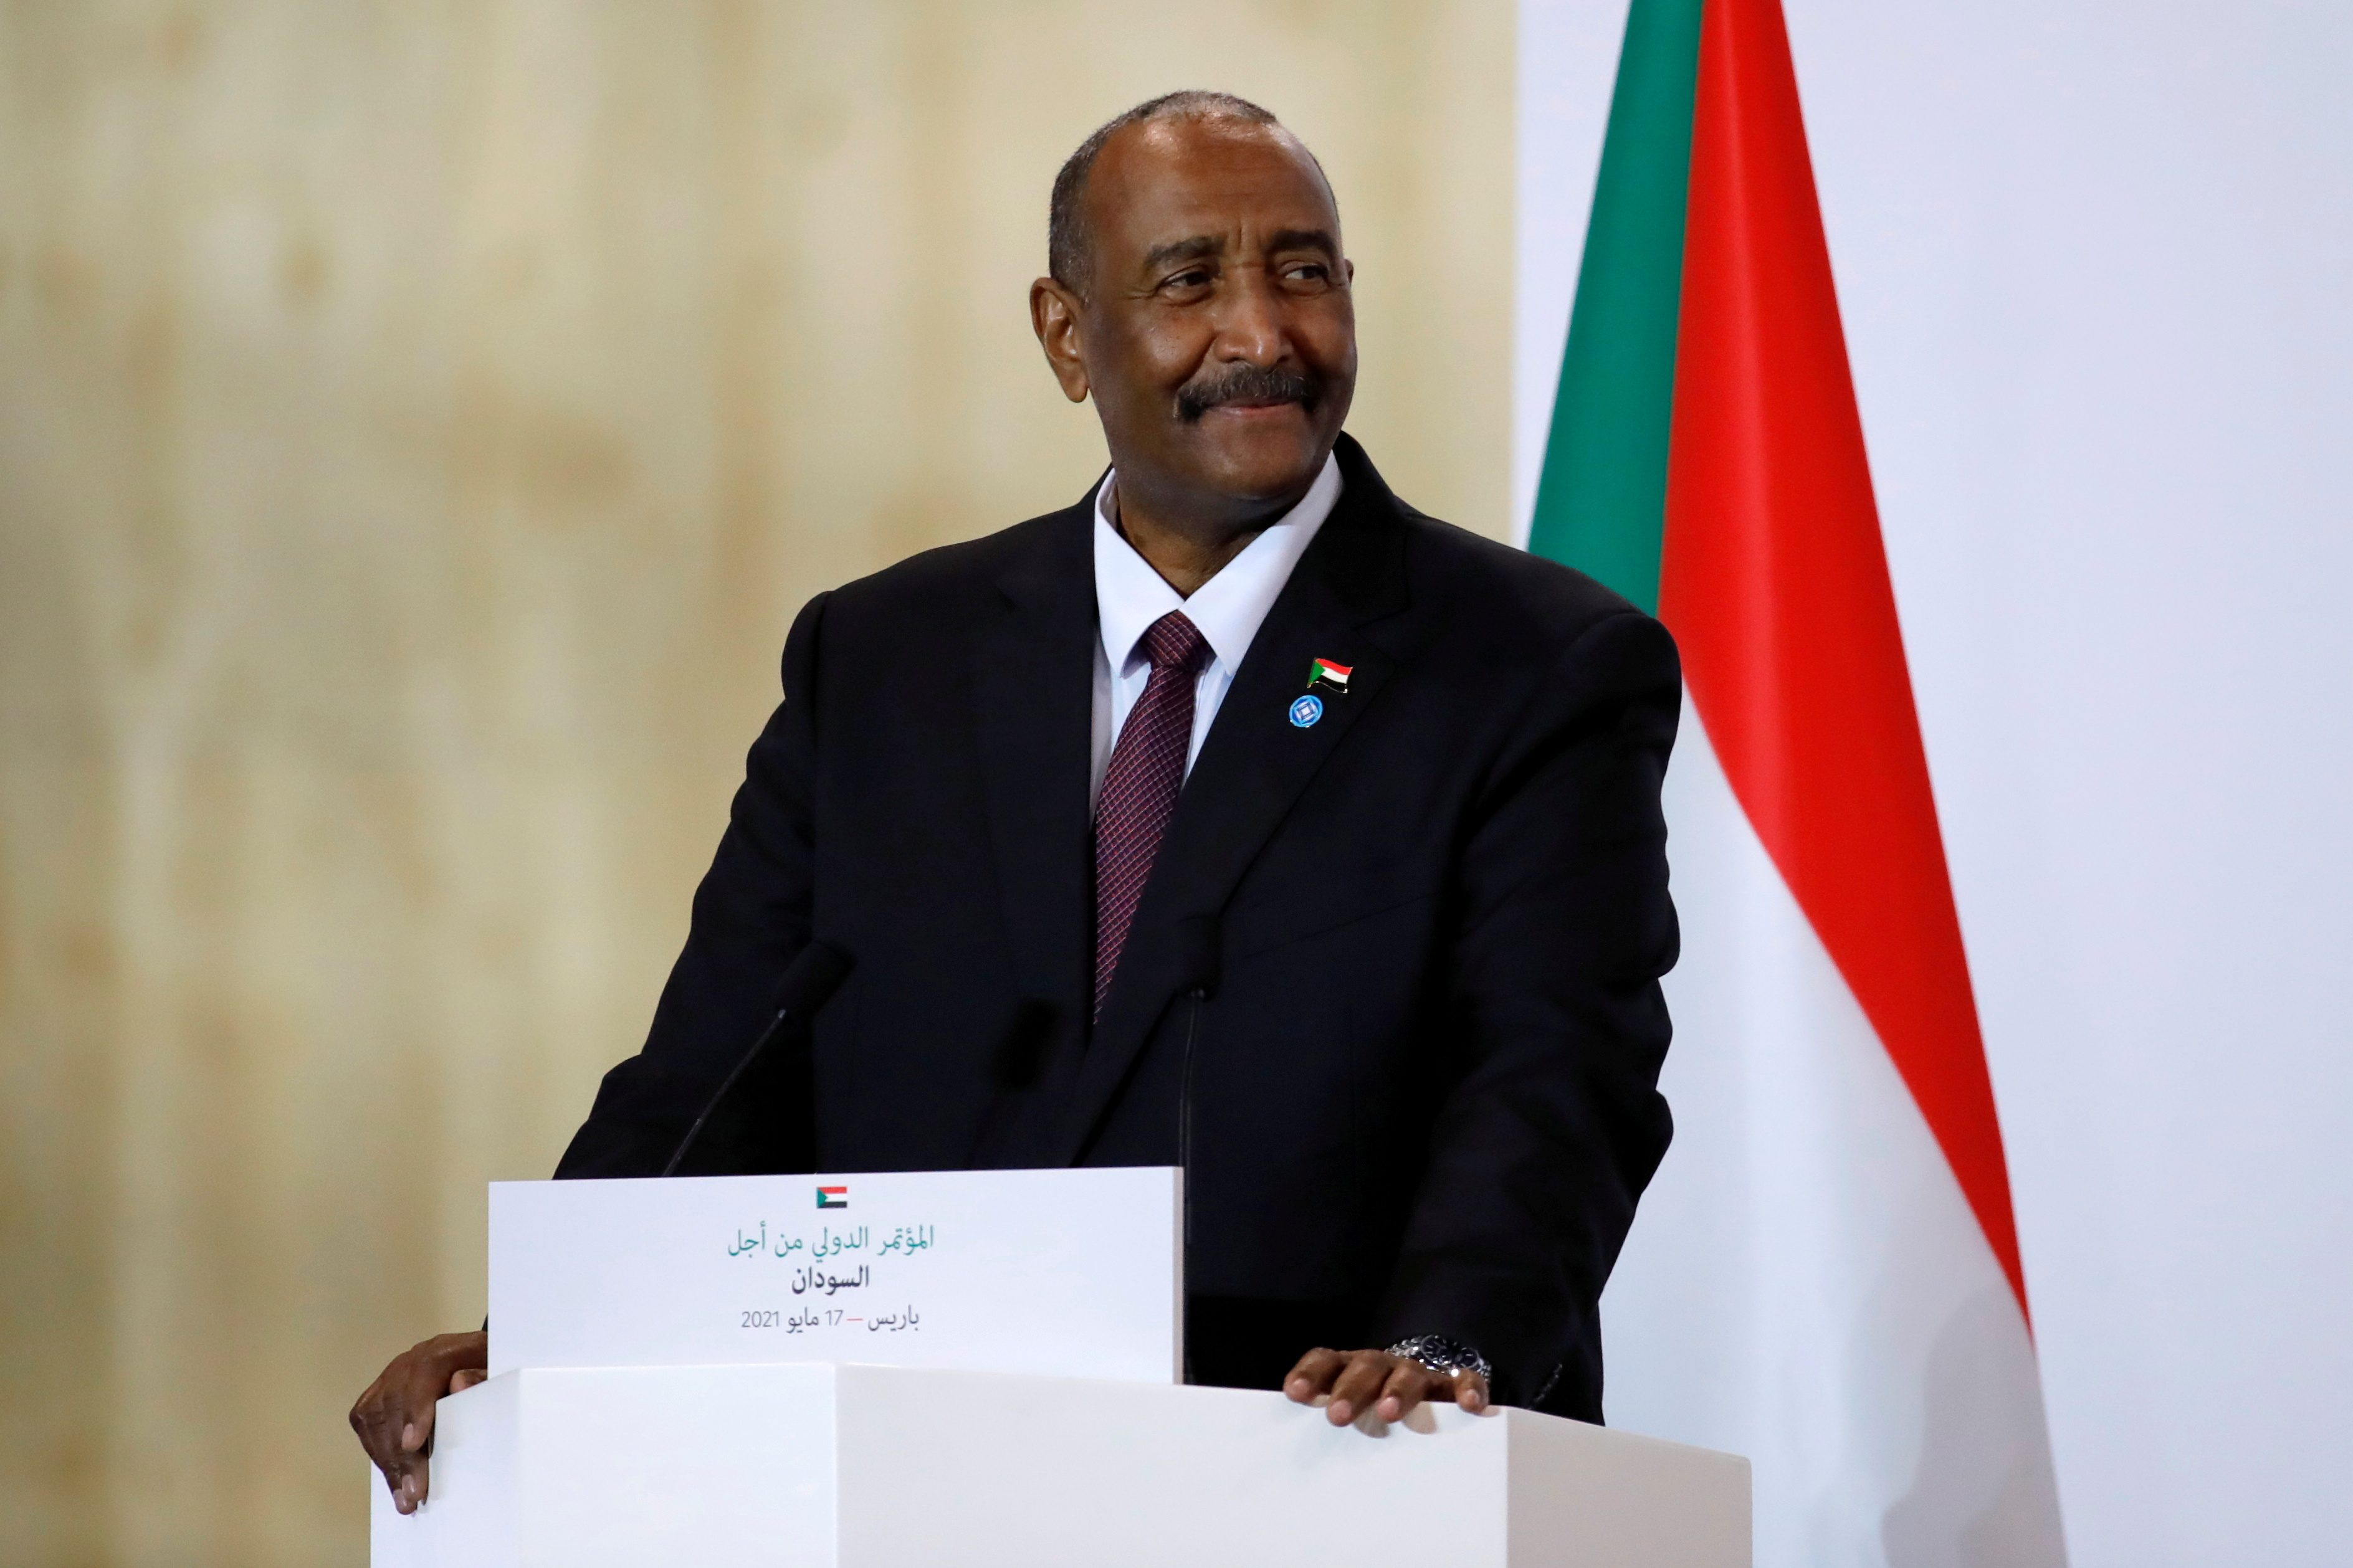 West says new Sudan army-led council violates democracy transition